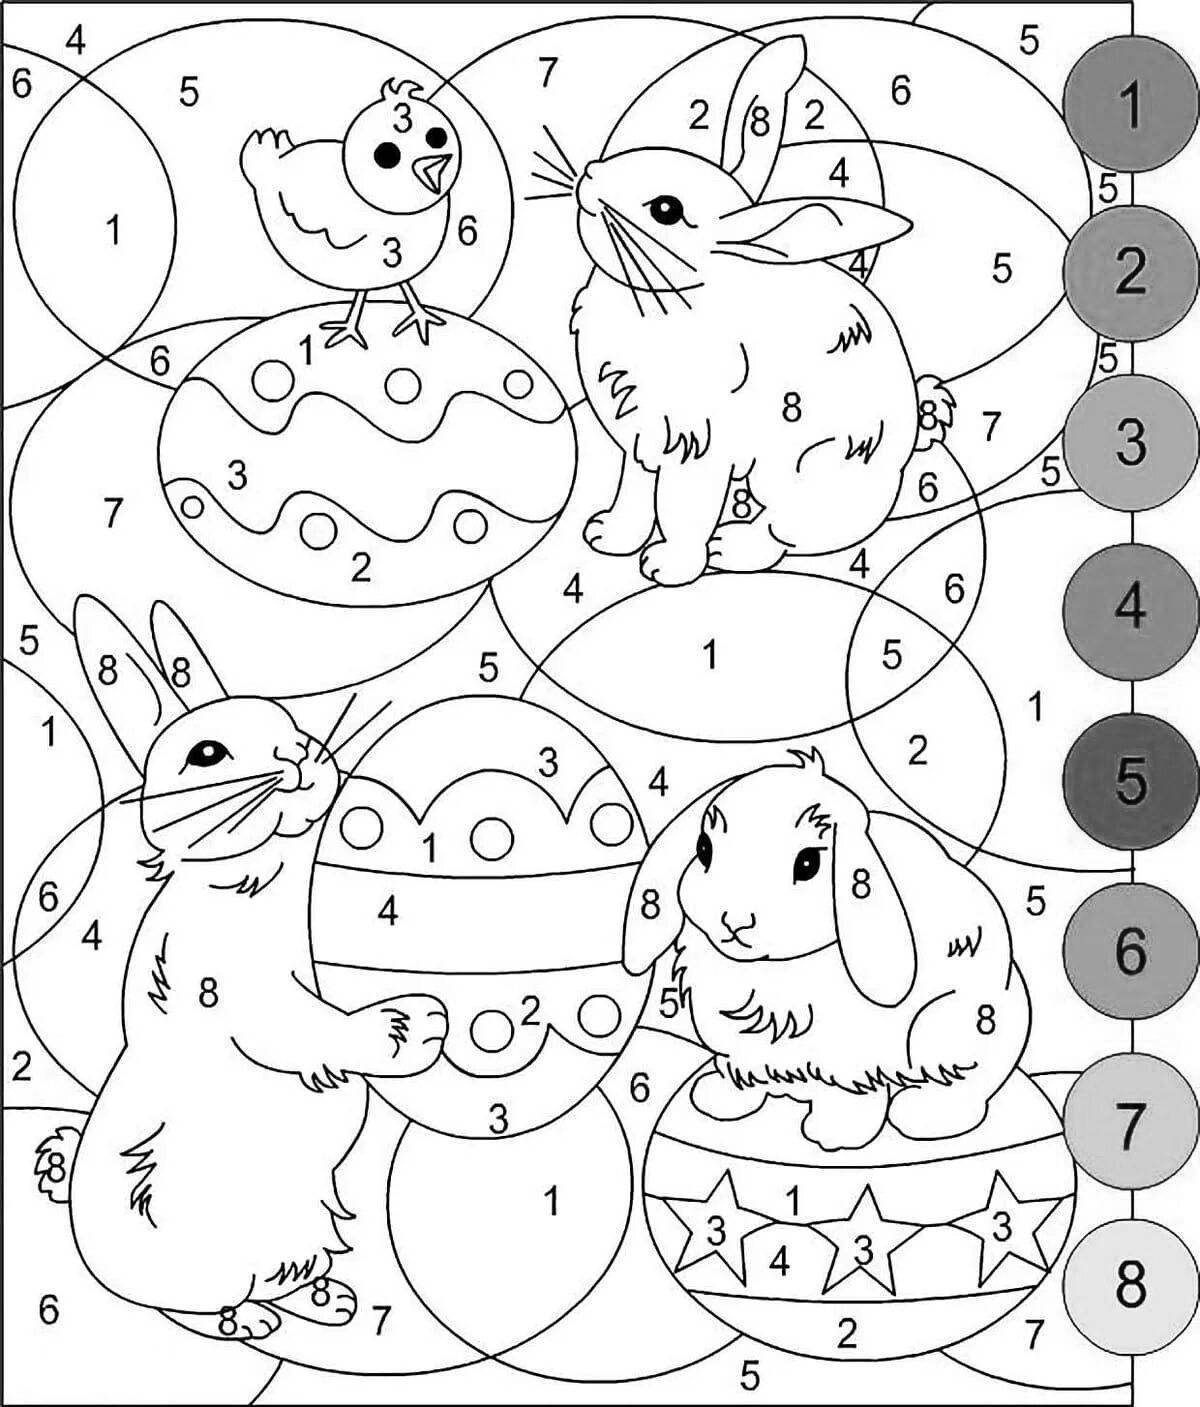 Color-splashed grade 2 coloring page by numbers